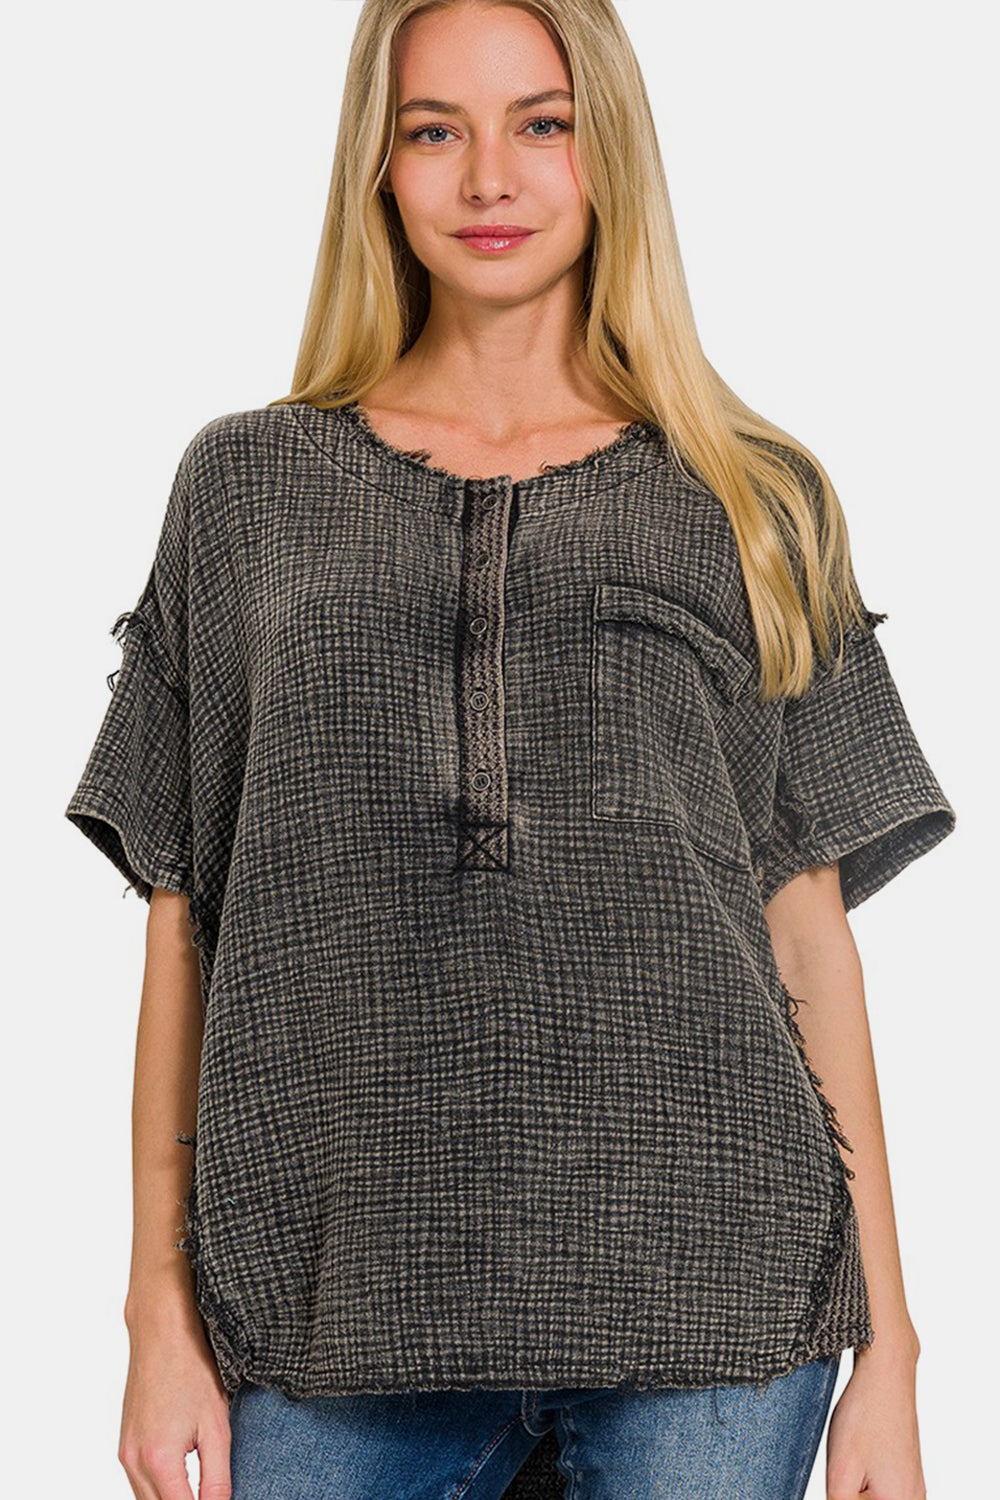 Edgy Basics Washed Texture Cotton Top